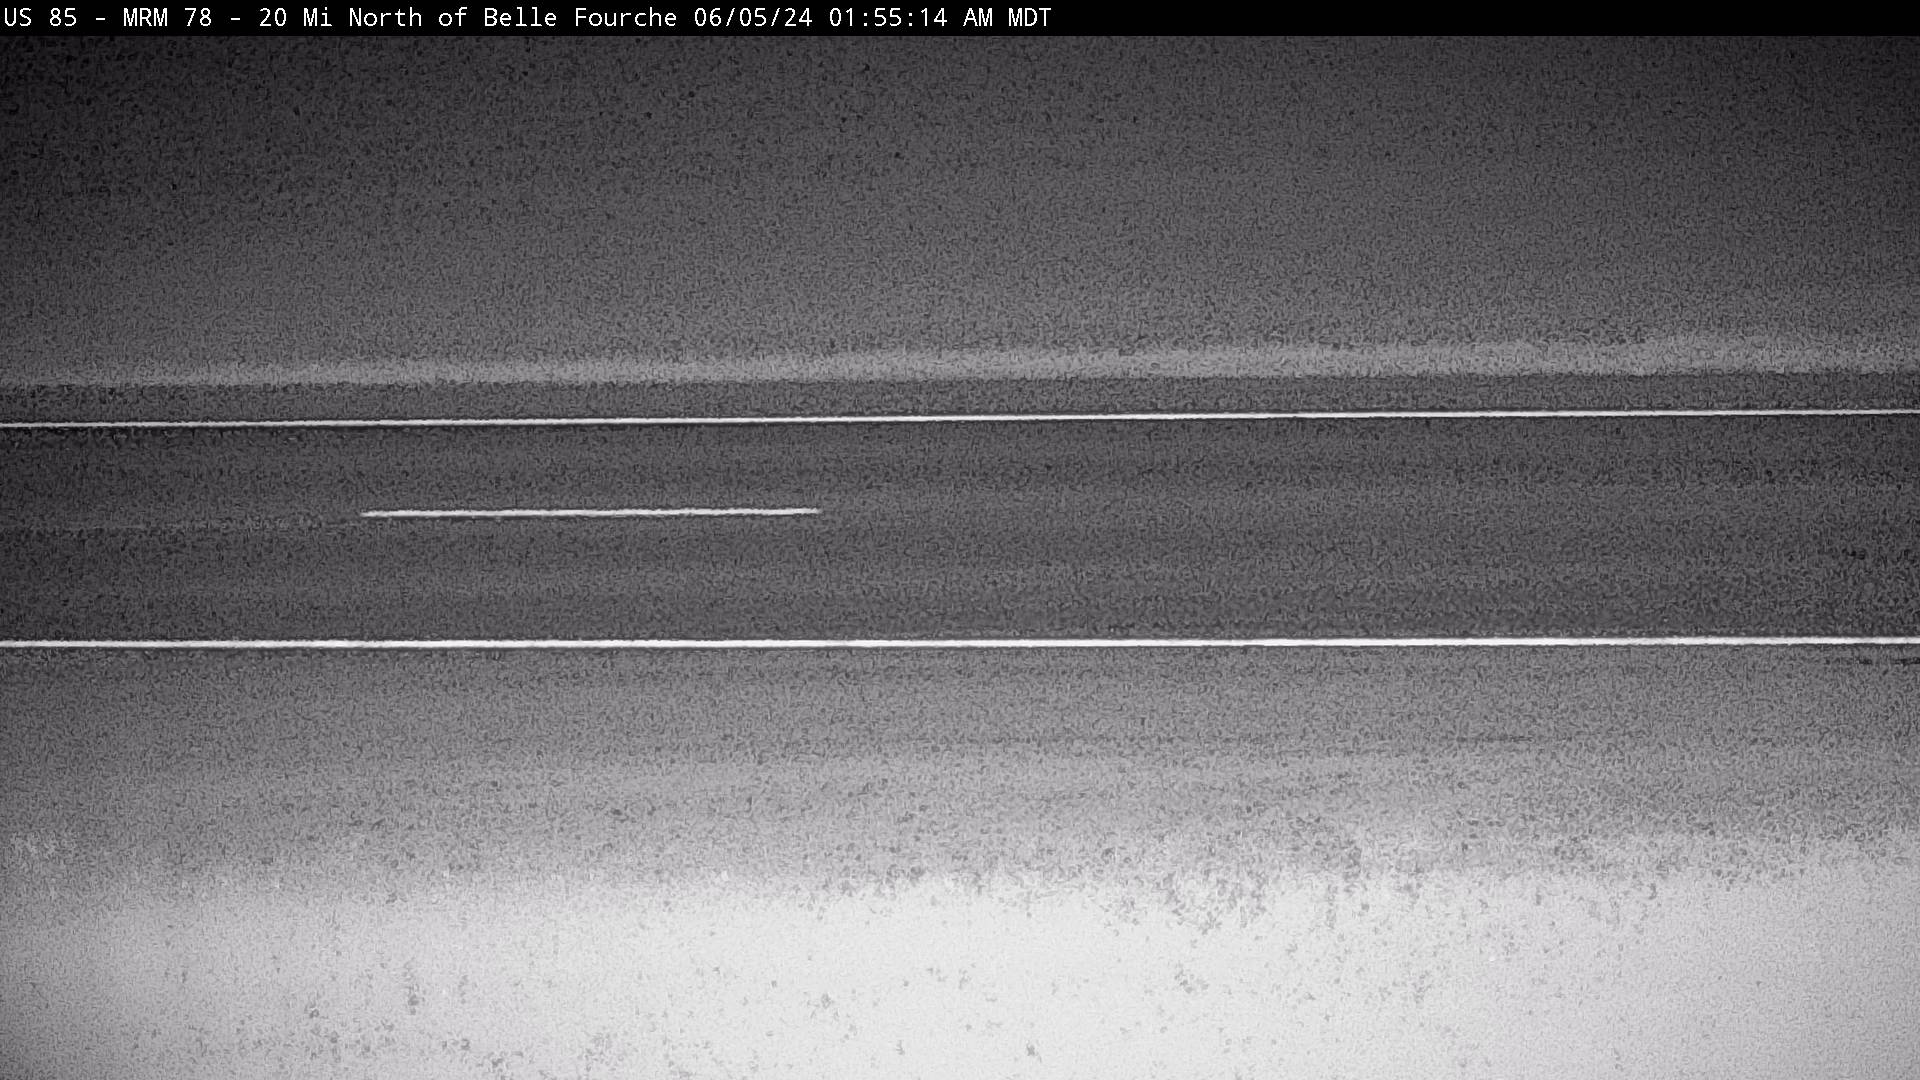 20 miles north of Belle Fourche along US-85 @ MP 78 - Northwest Traffic Camera